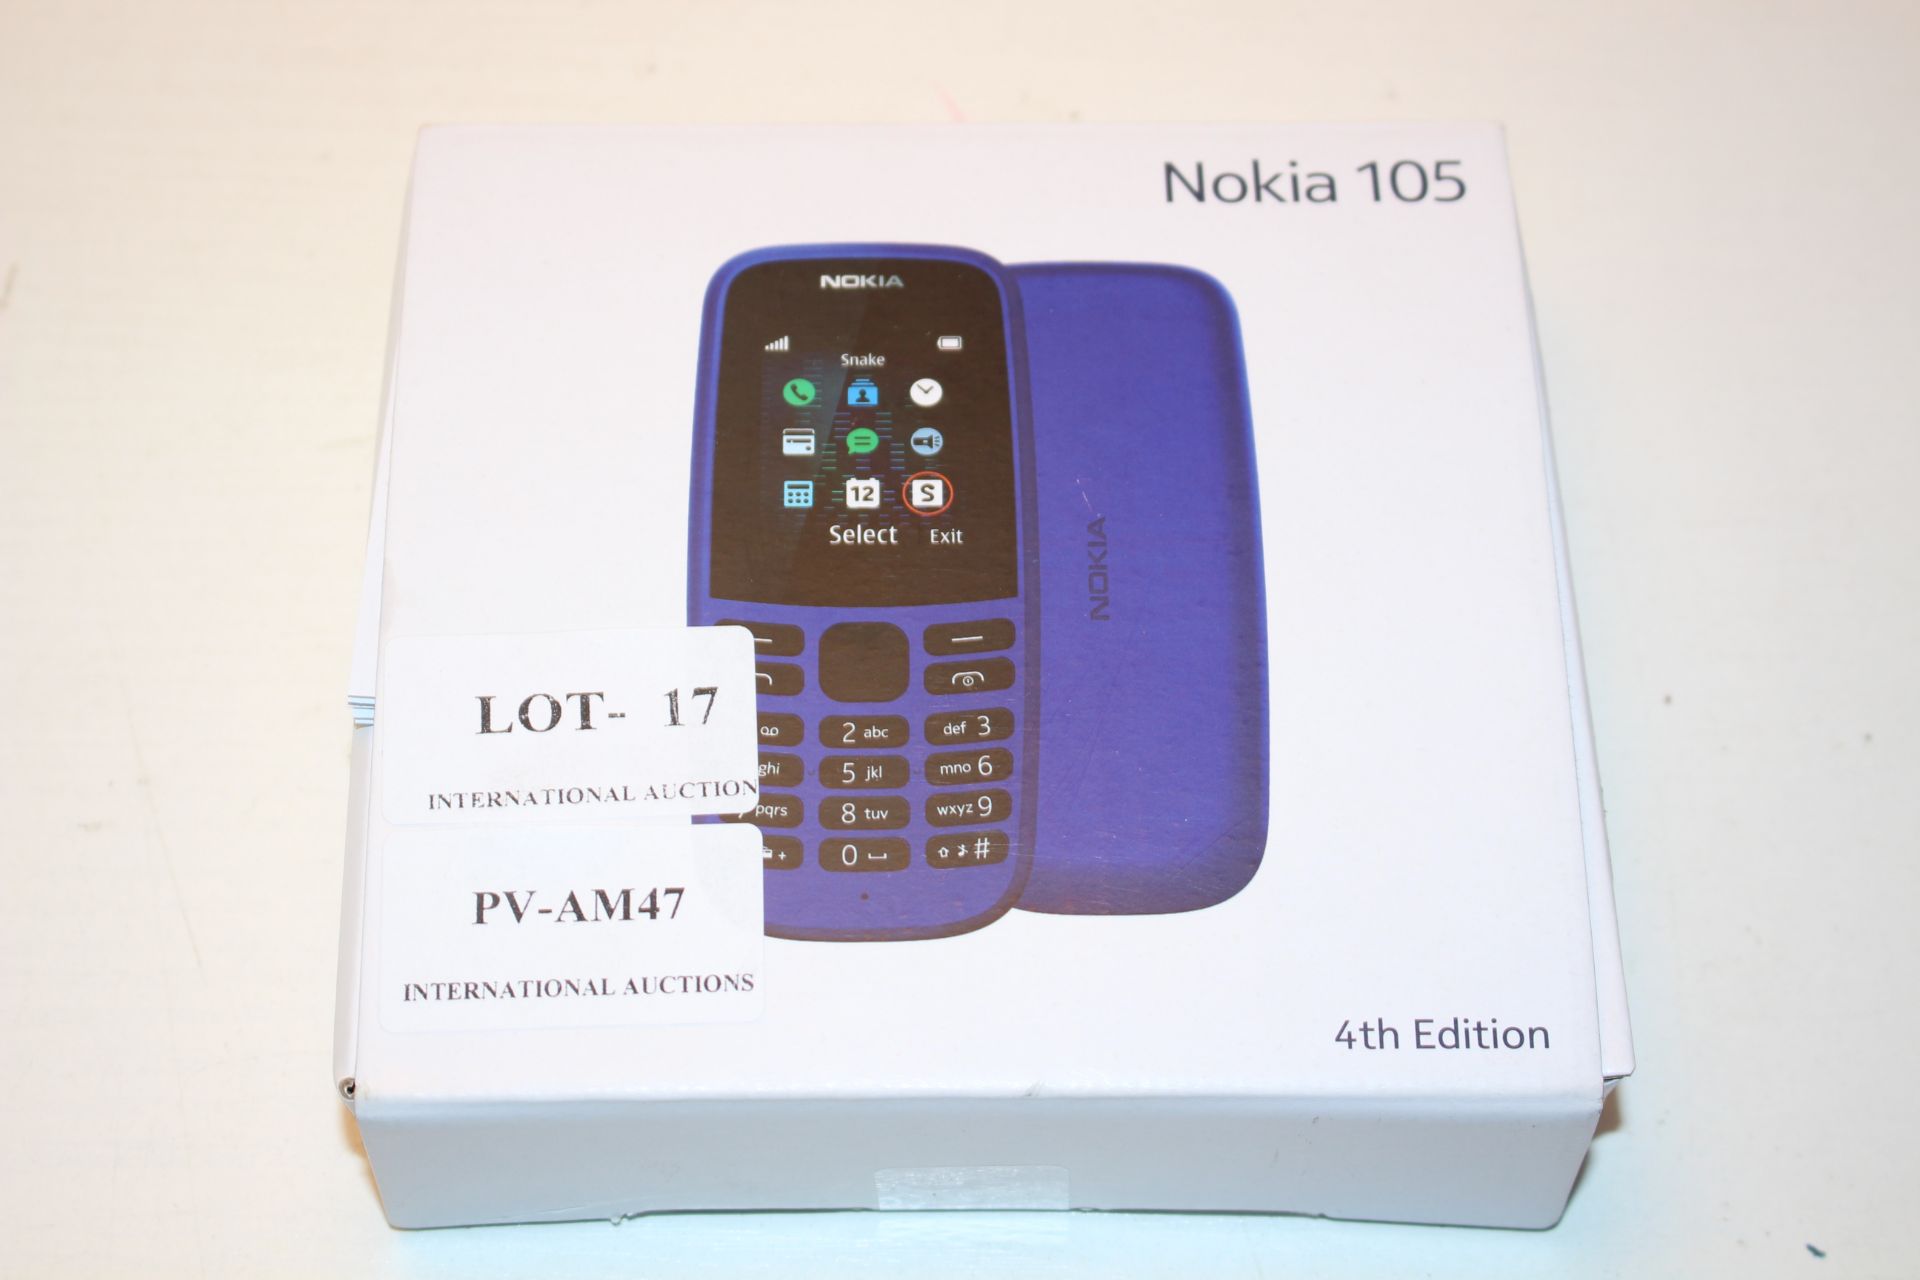 BOXED NOKIA 105 4TH EDITION MOBILE PHONE RRP £29.99Condition ReportAppraisal Available on Request-